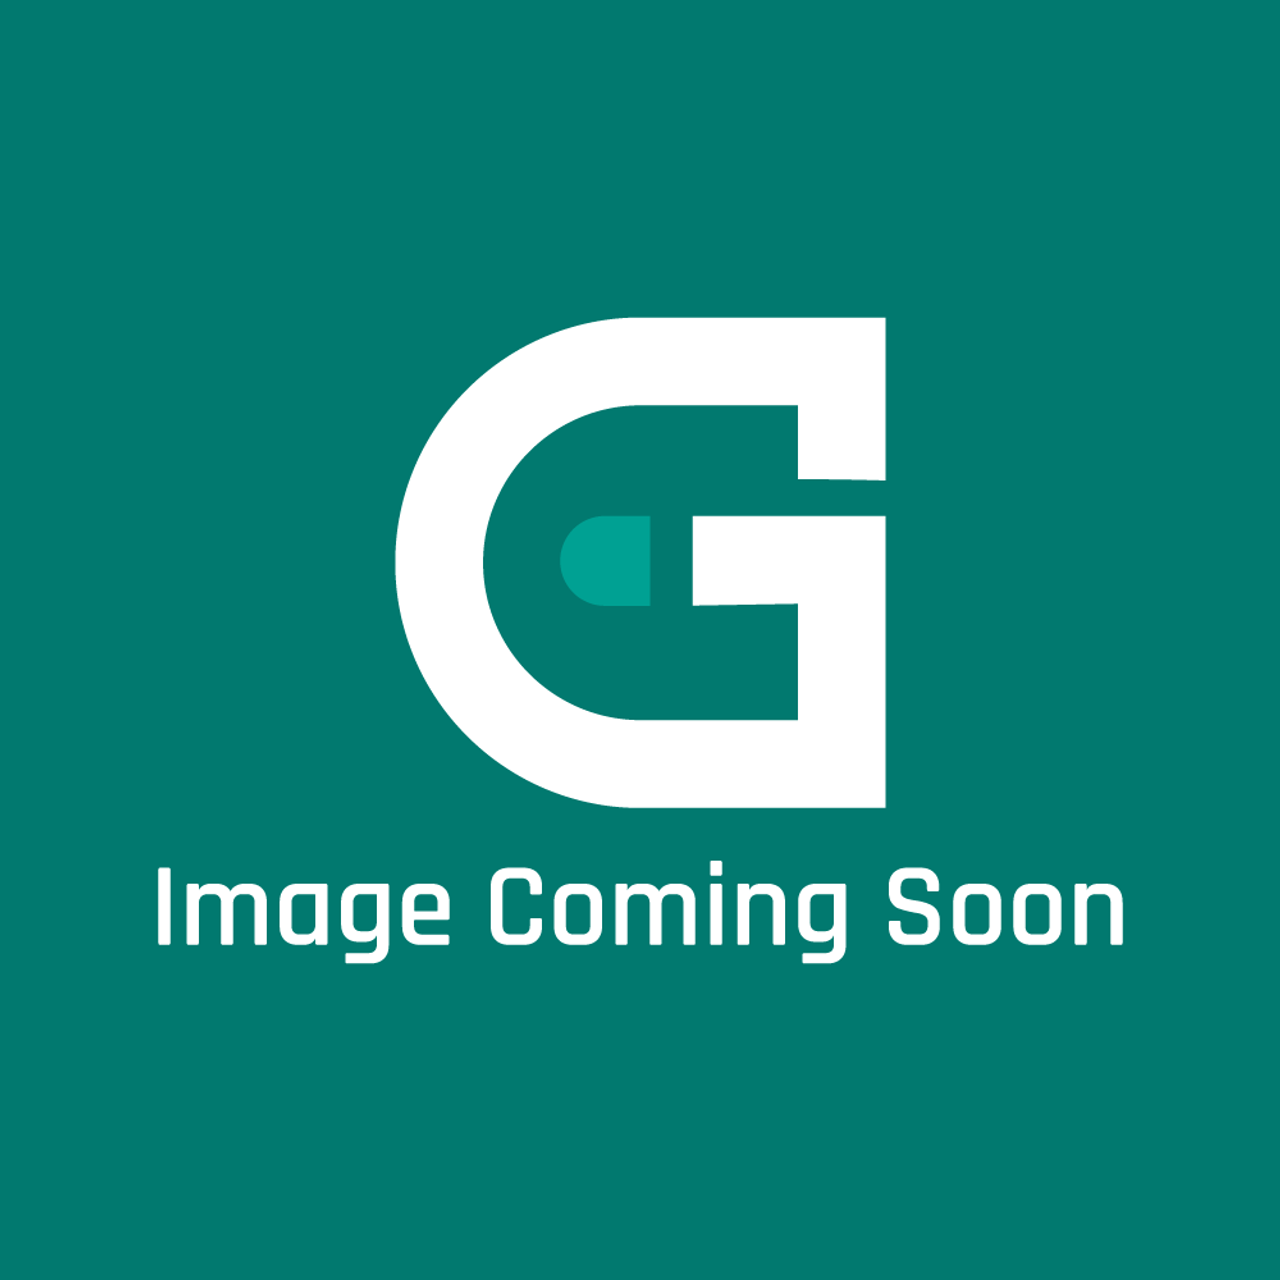 GE Appliances WR14X10254 - Gasket Mullion Duct - Image Coming Soon!